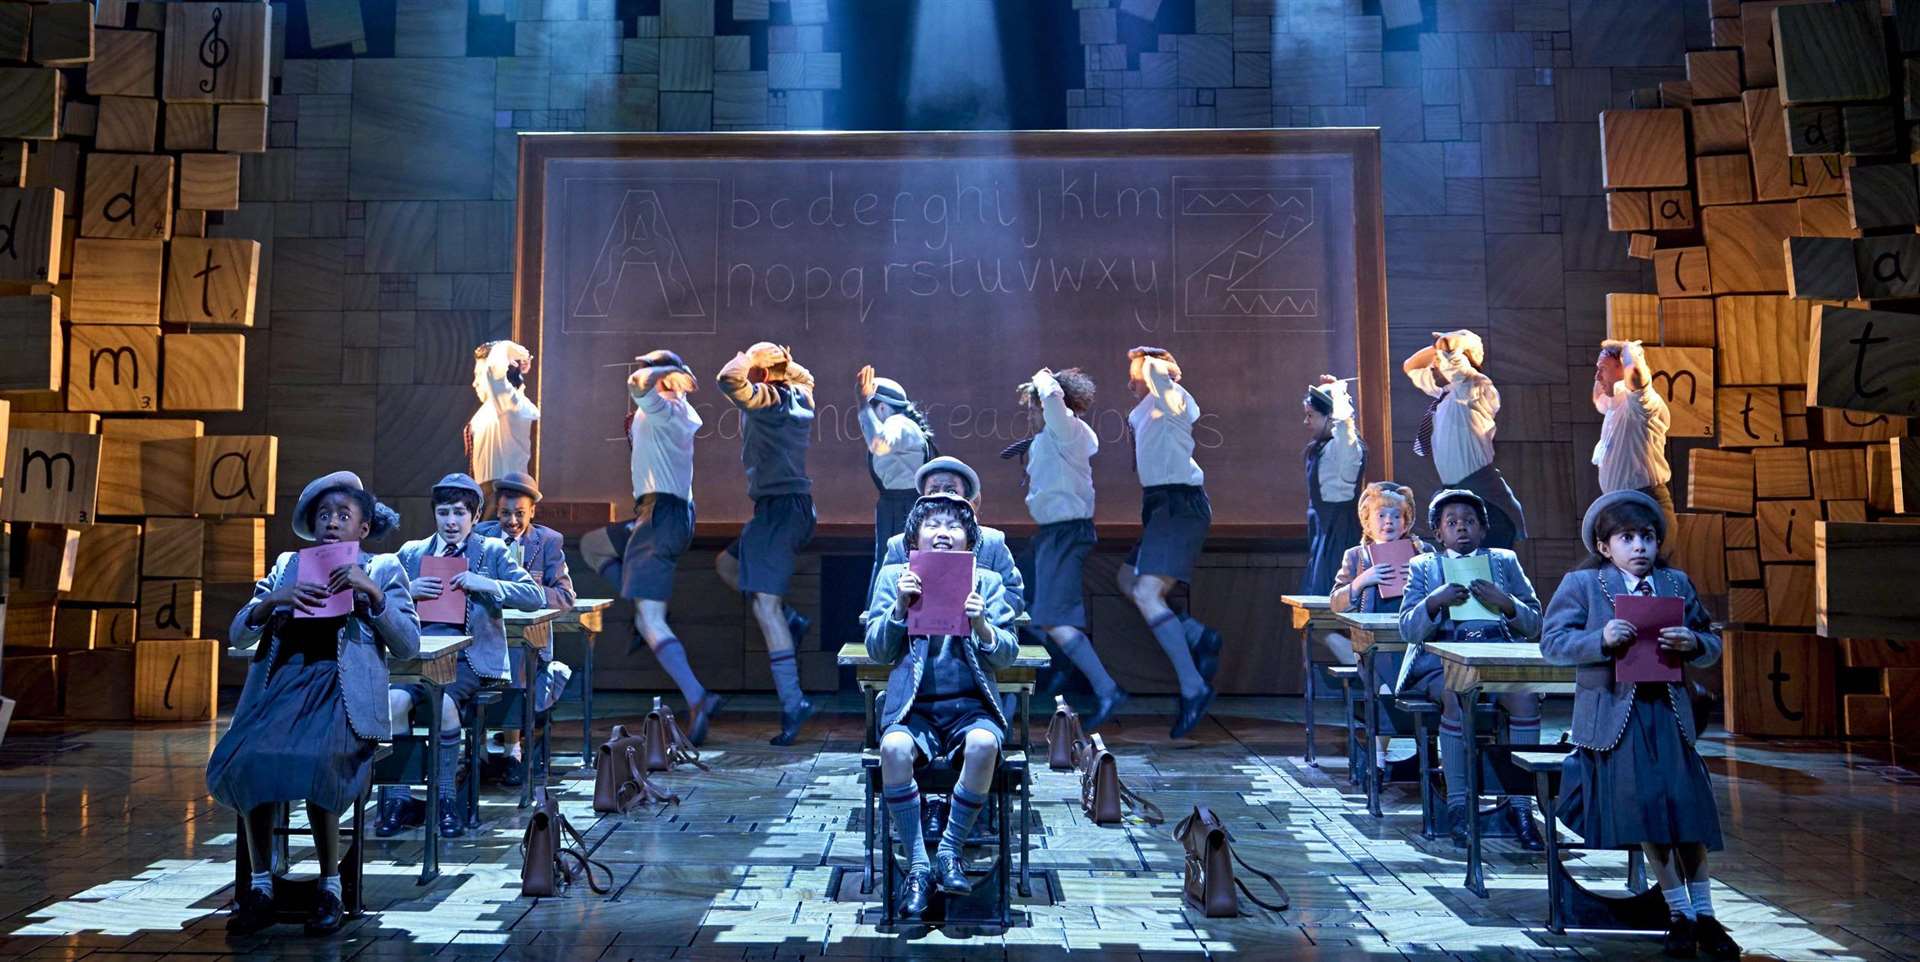 Matilda the Musical is one of the most successful new musicals of the 21st century. Picture: Manuel Harlan